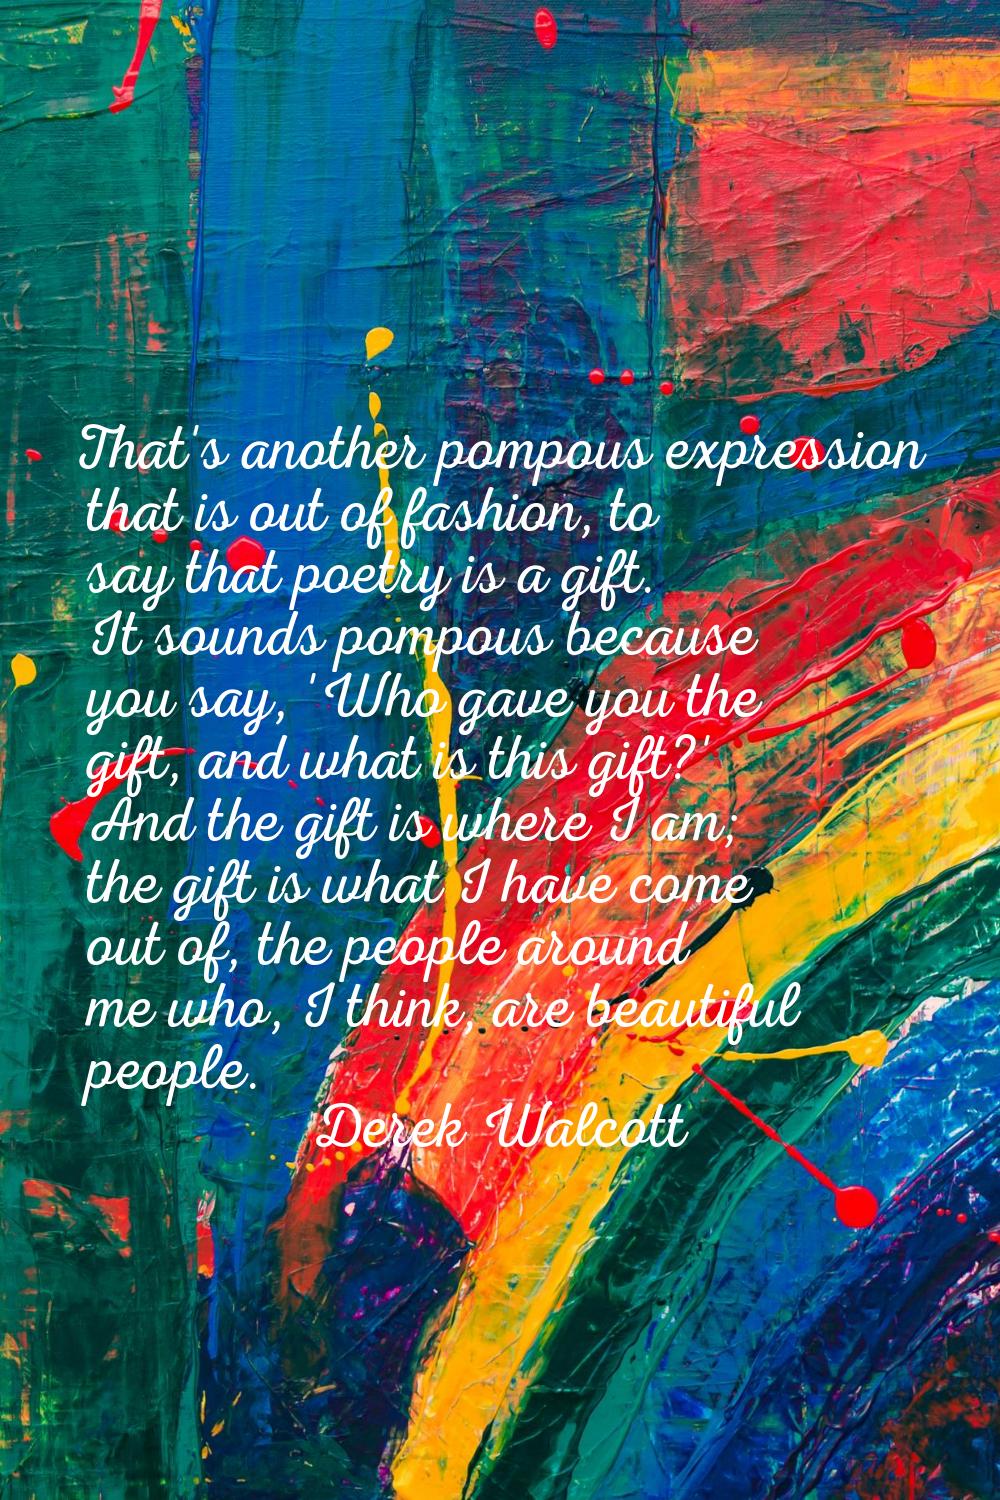 That's another pompous expression that is out of fashion, to say that poetry is a gift. It sounds p